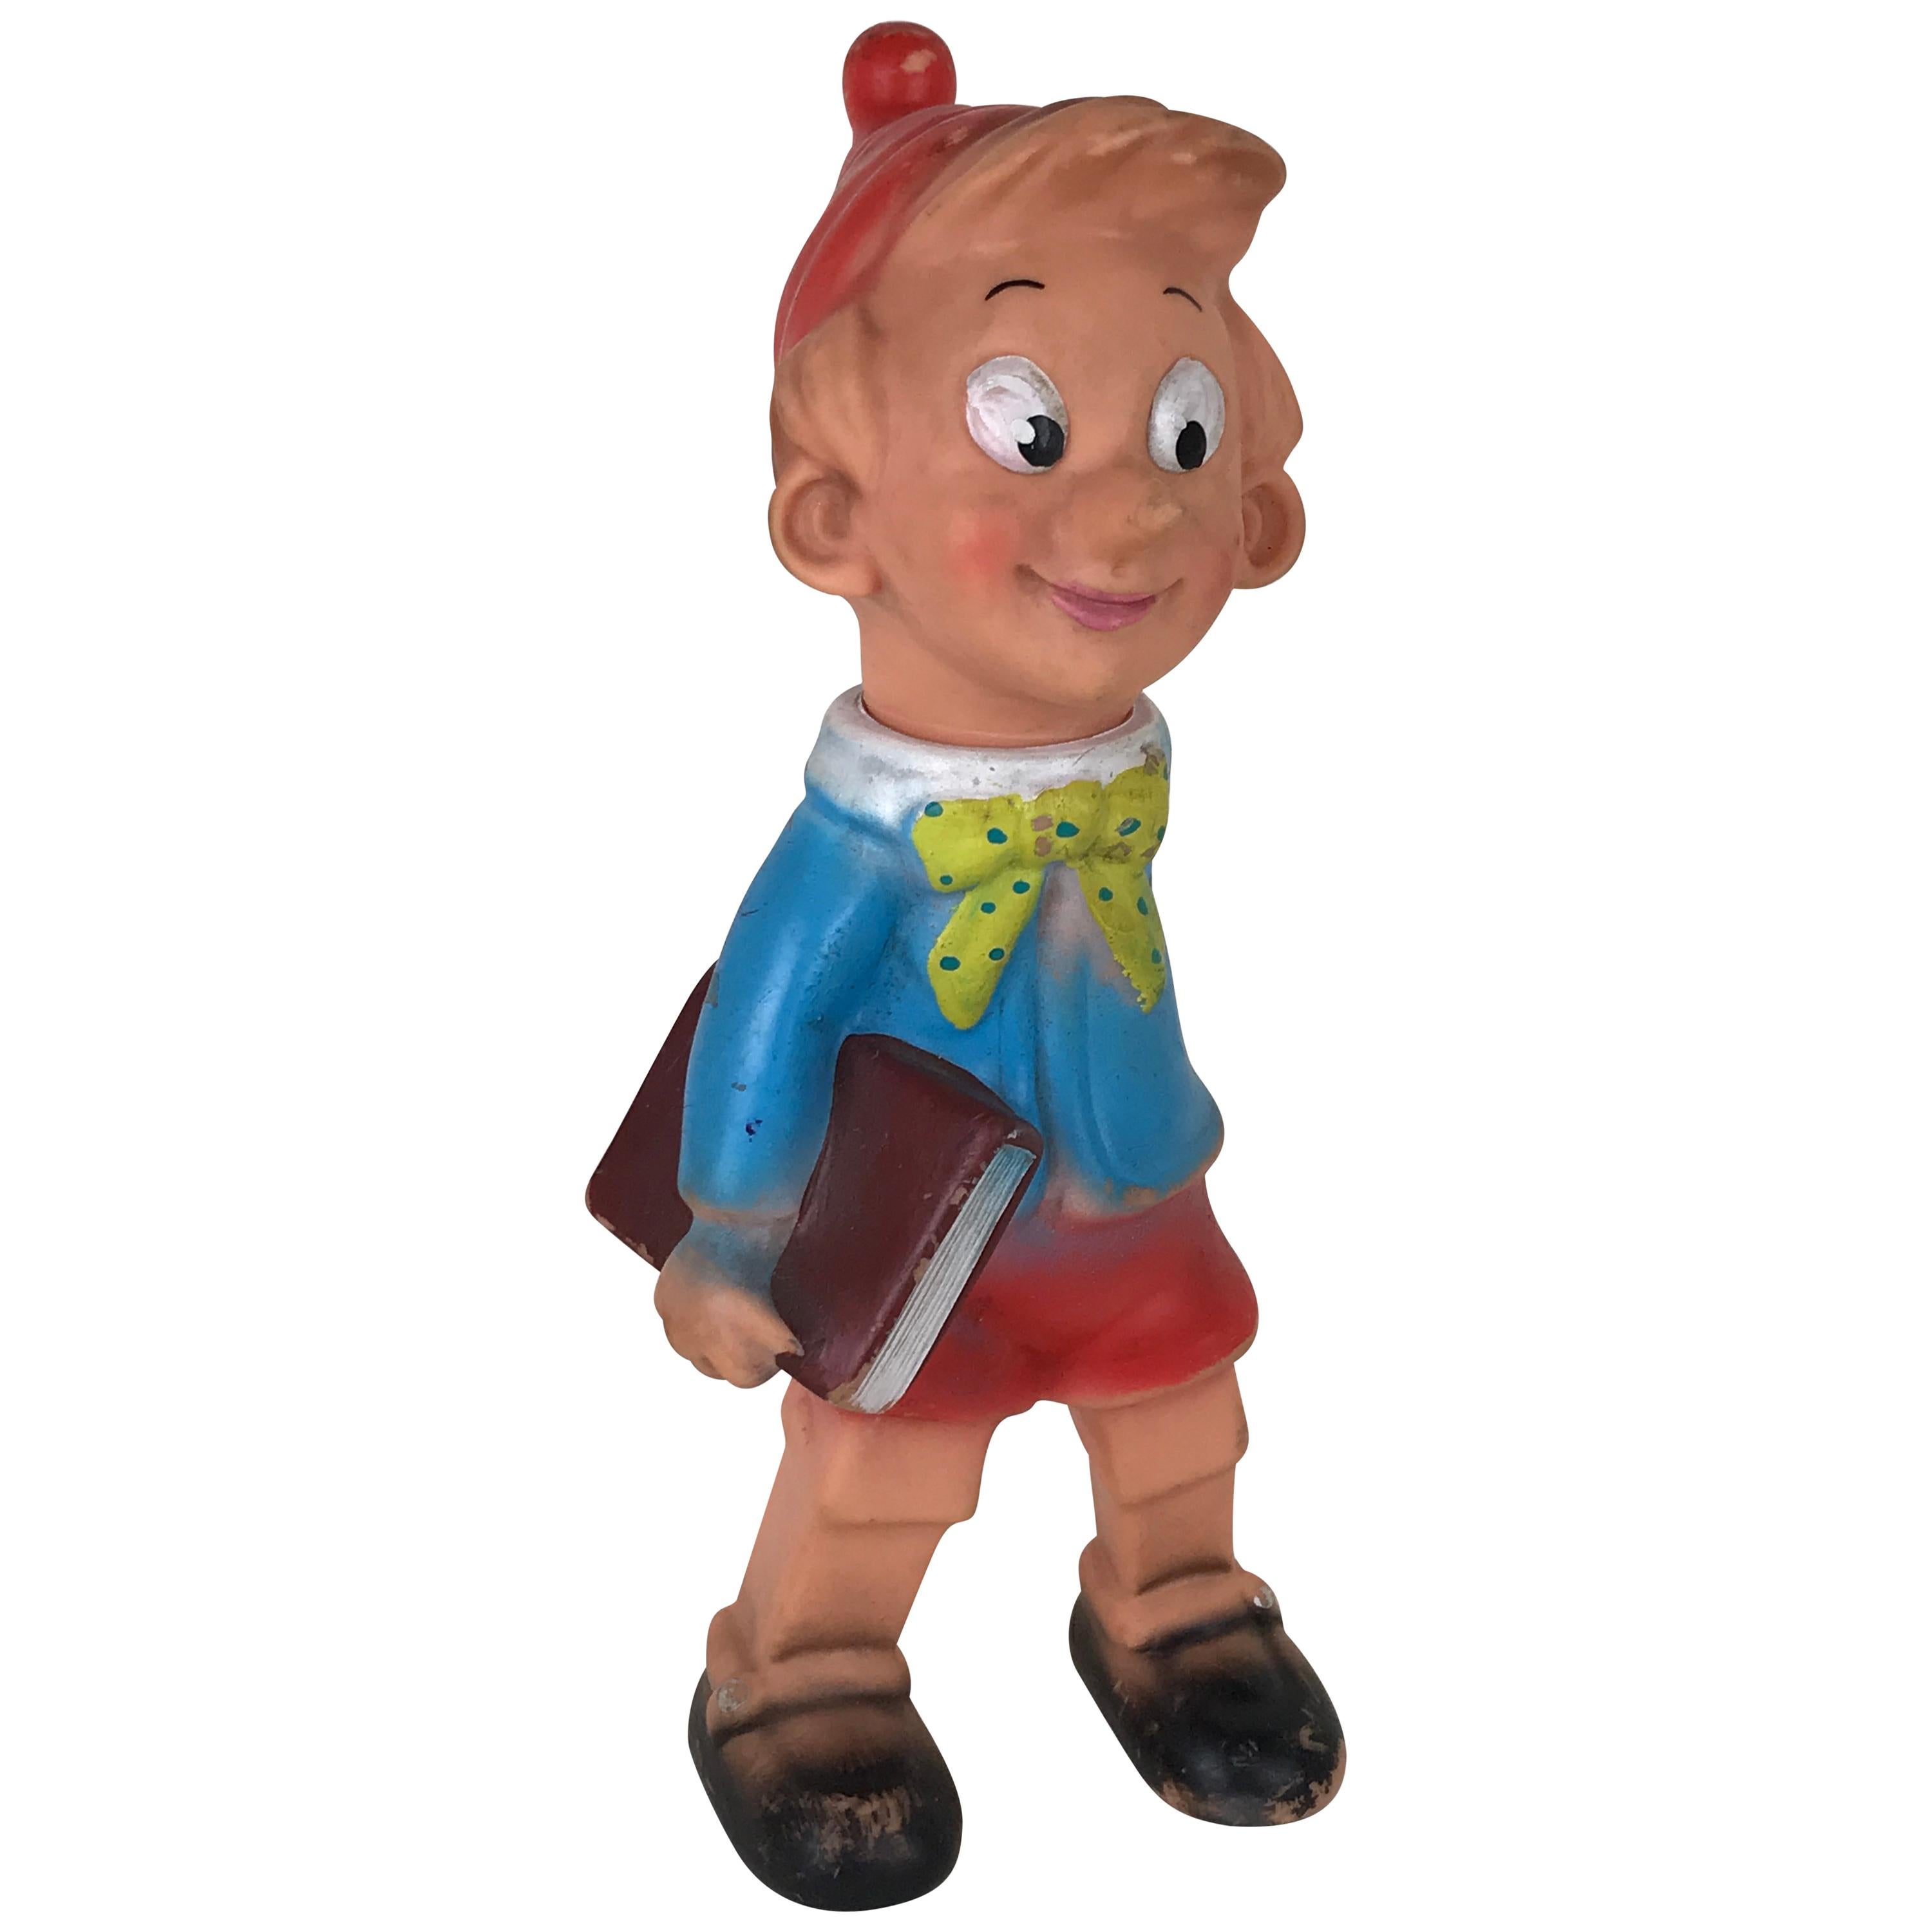 1960s Vintage Italian Pinocchio Rubber Squeak Toy Made by Rubbertoys For Sale